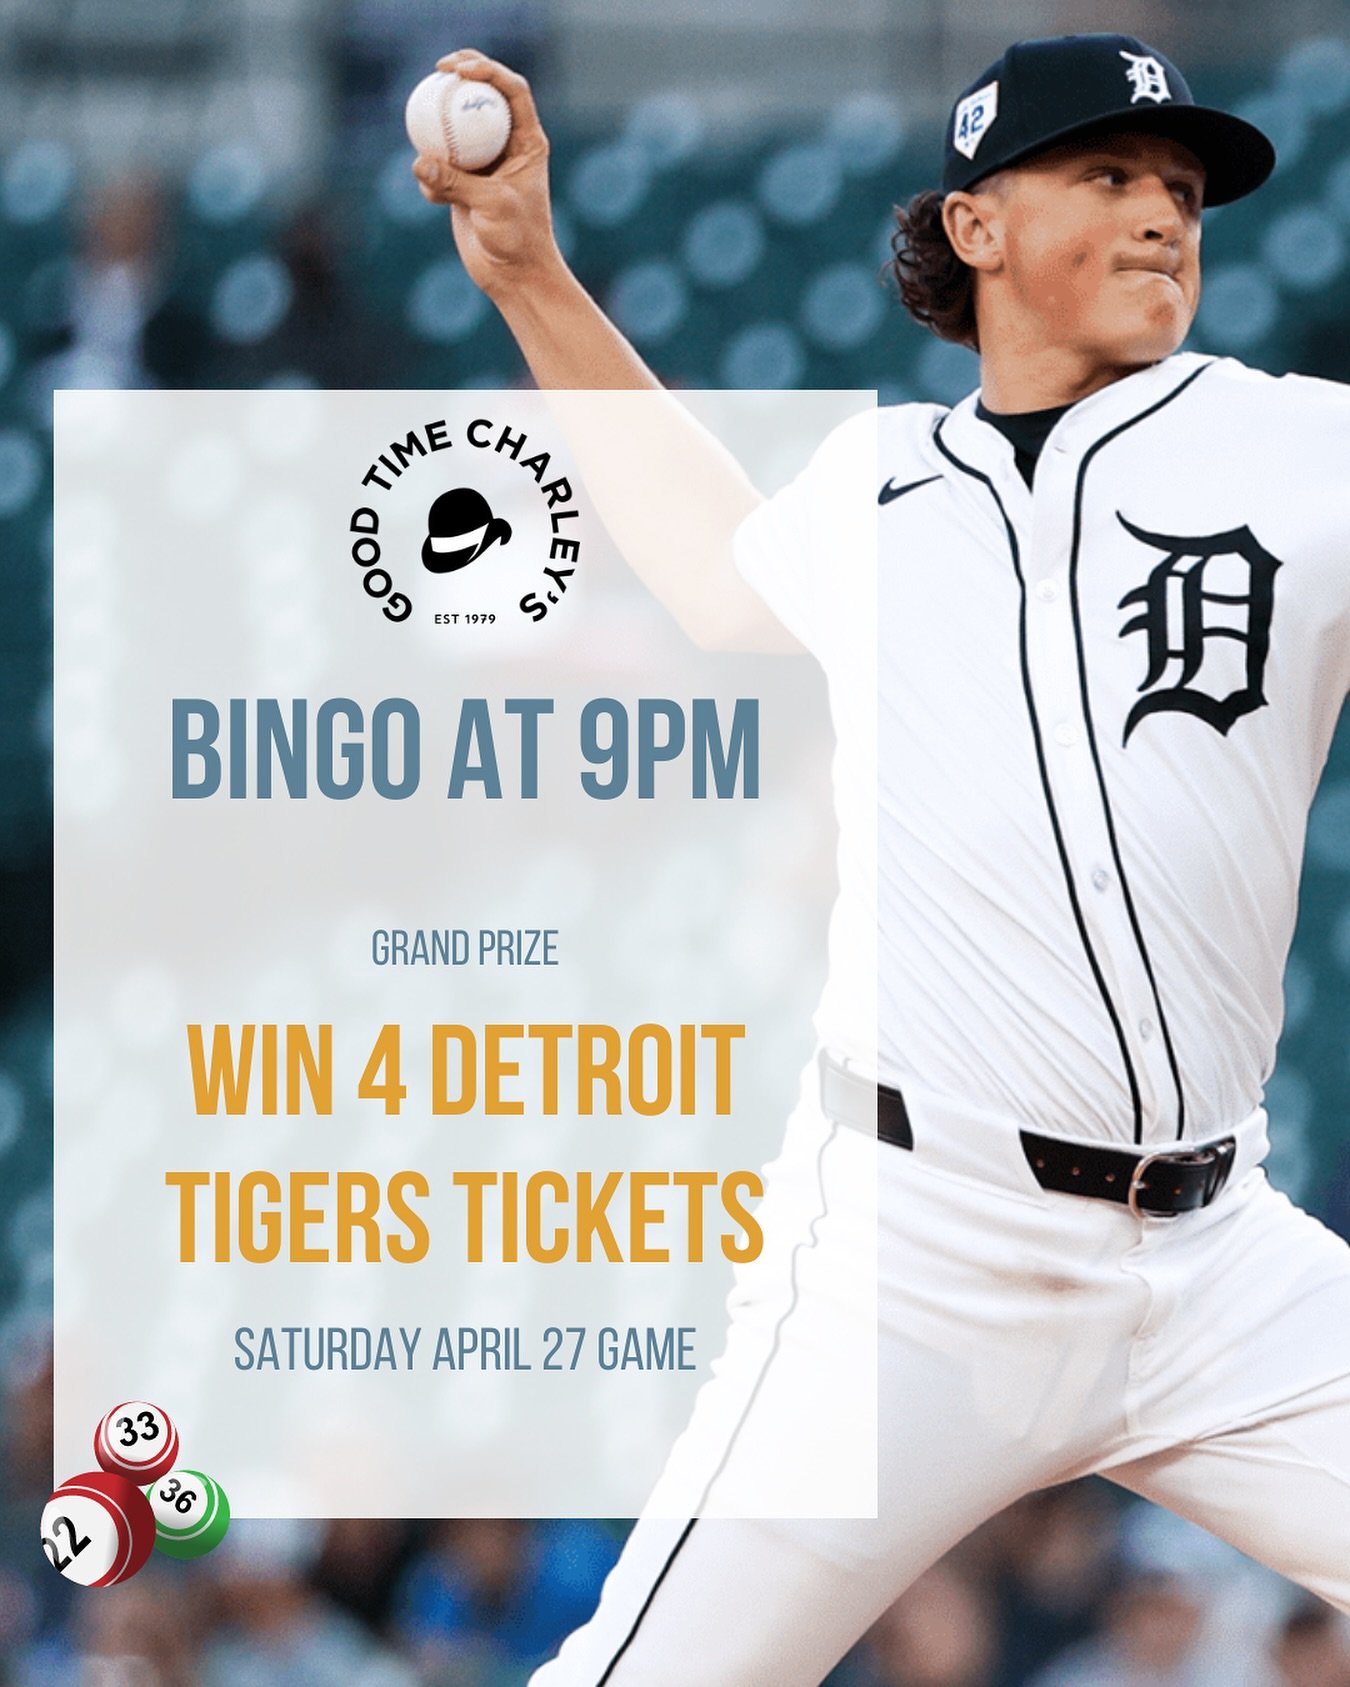 Come play Bingo tonight starting at 9pm for your chance to win 4 DETROIT TIGERS TICKETS (Saturday, April 27 game)

⚾️⚾️⚾️

Bingo is free to play and games start at 9, new game every 20 min!

$6 22oz iced teas | $11 iced tea fishbowls
$6 3pc tenders |